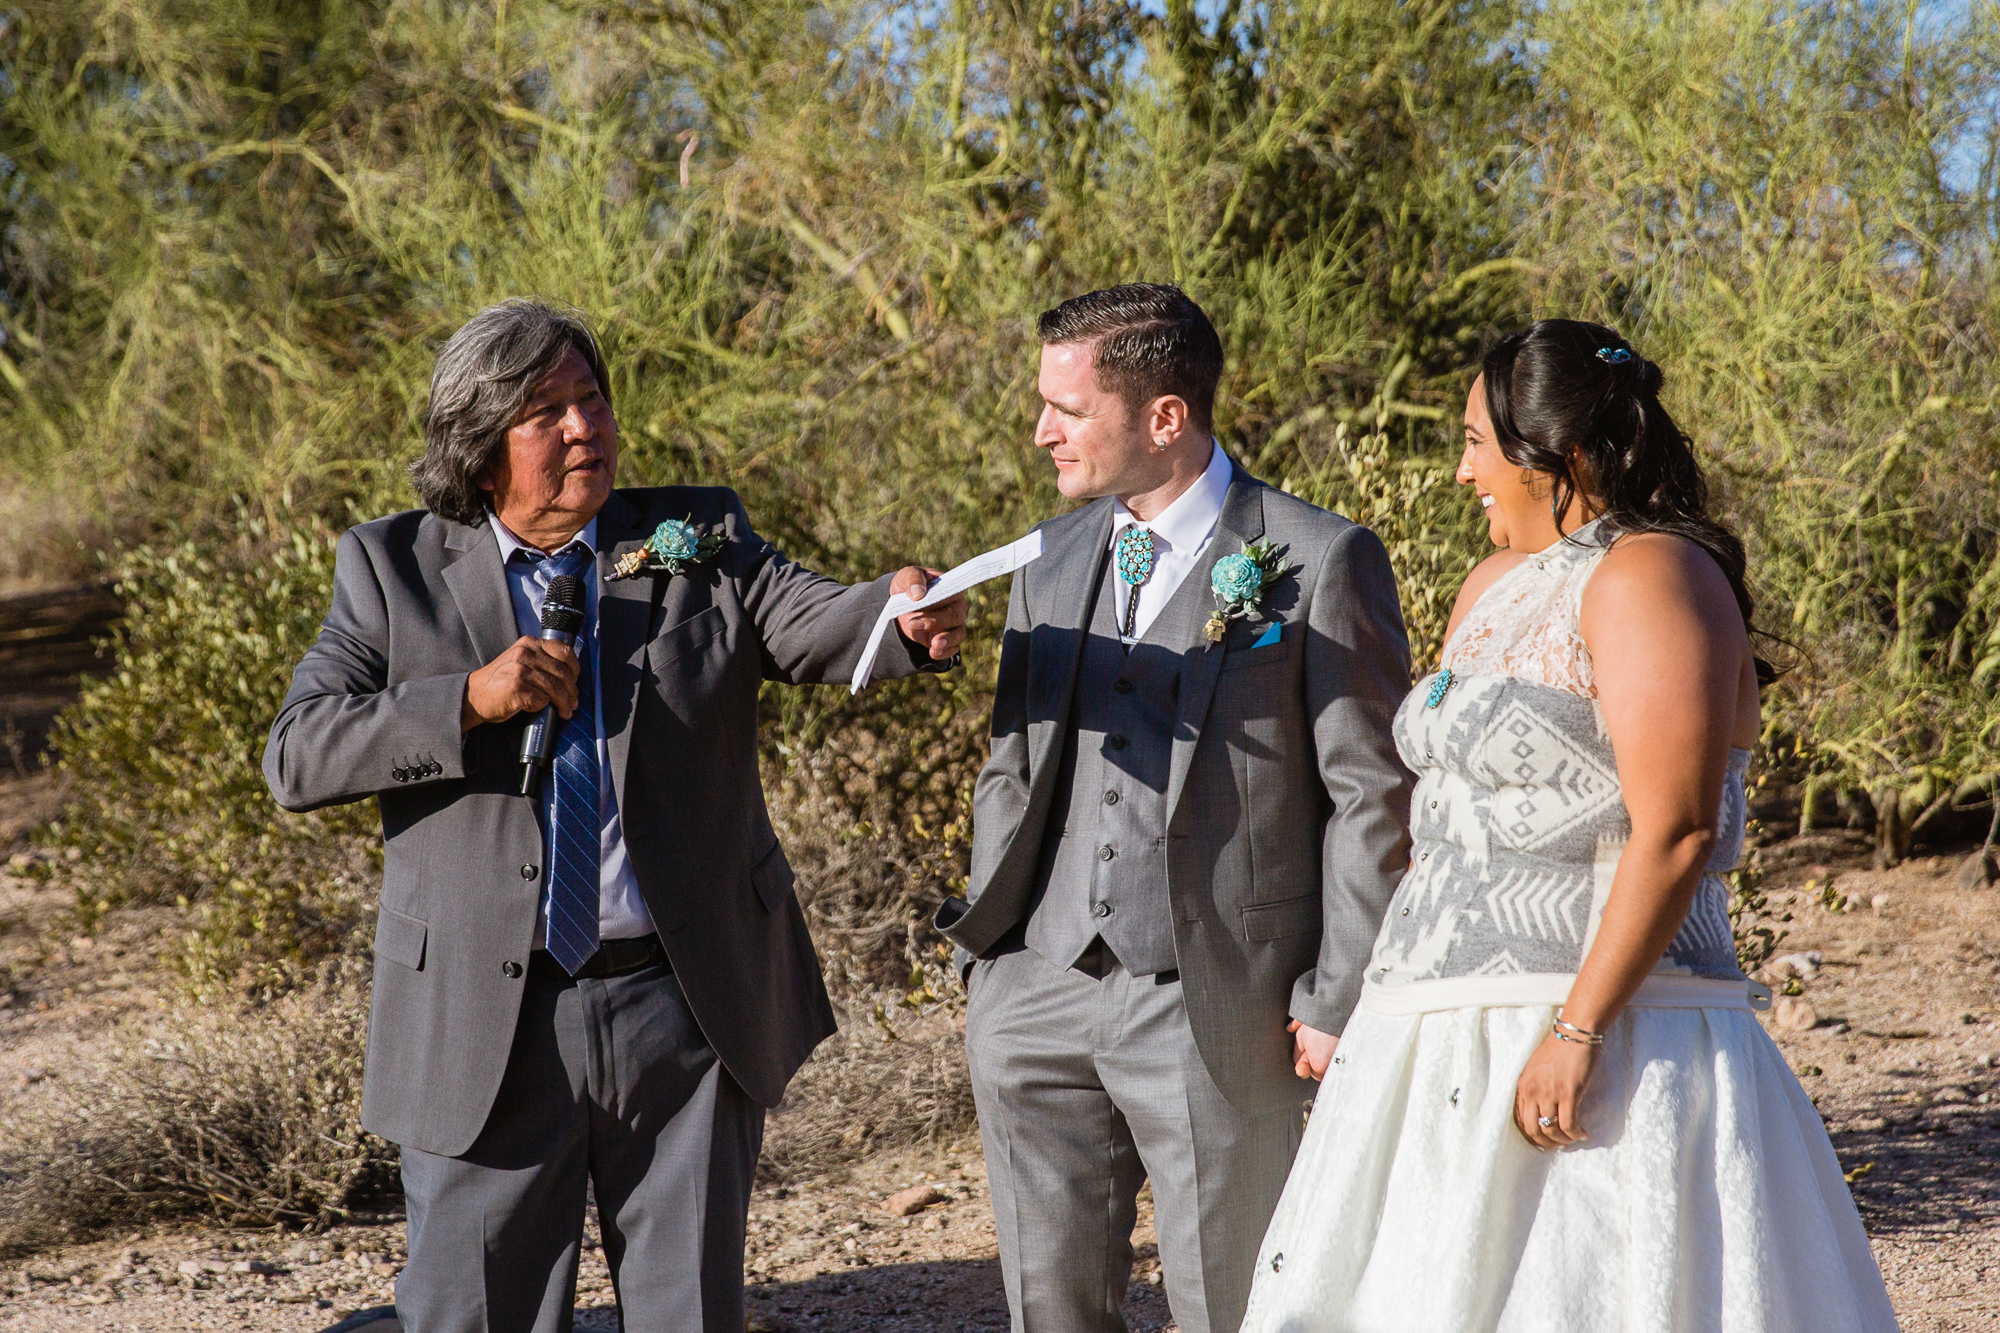 Bride's father giving a toast at the wedding reception at Lost Dutchman State Park by Arizona wedding photographer PMA Photography.